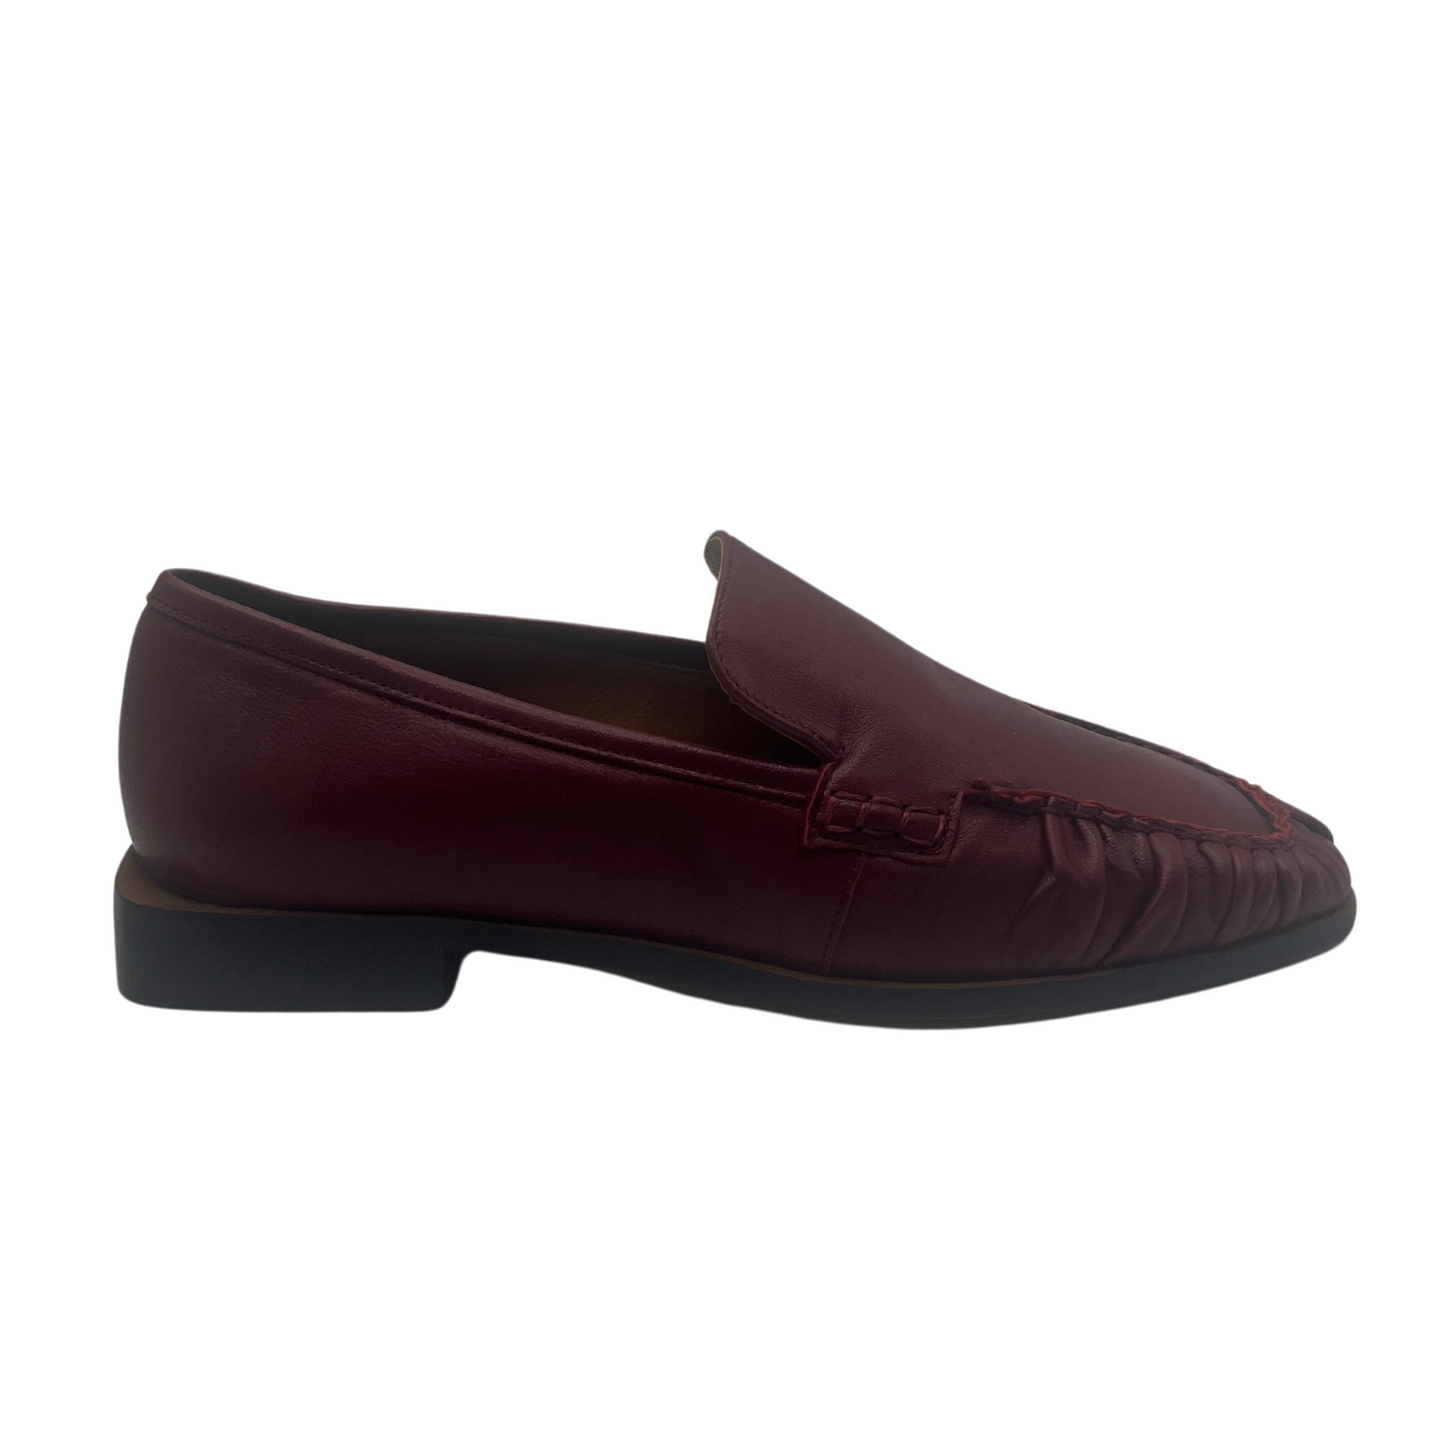 Right facing view of ruby leather loafer with block heel and square toe